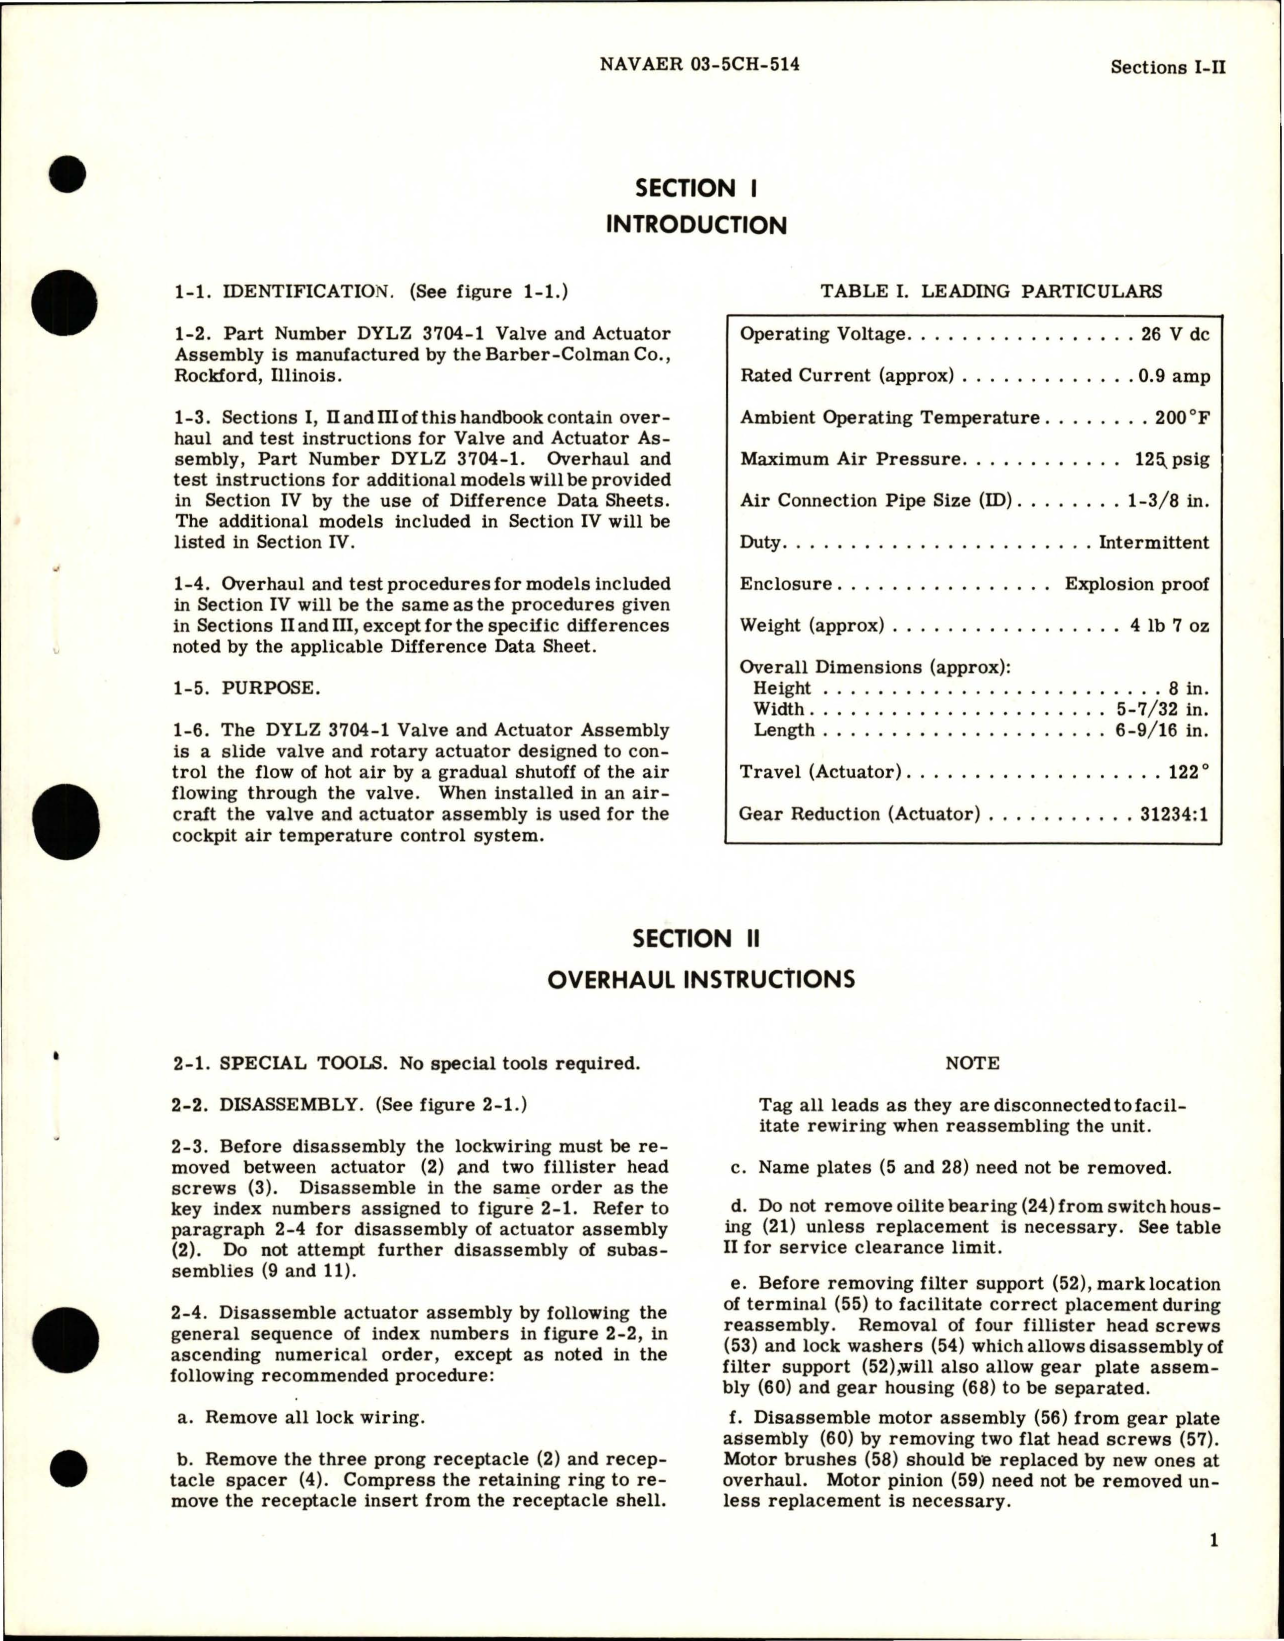 Sample page 5 from AirCorps Library document: Overhaul Instructions for Valve and Actuator Assembly - Part DYLZ 3704-1